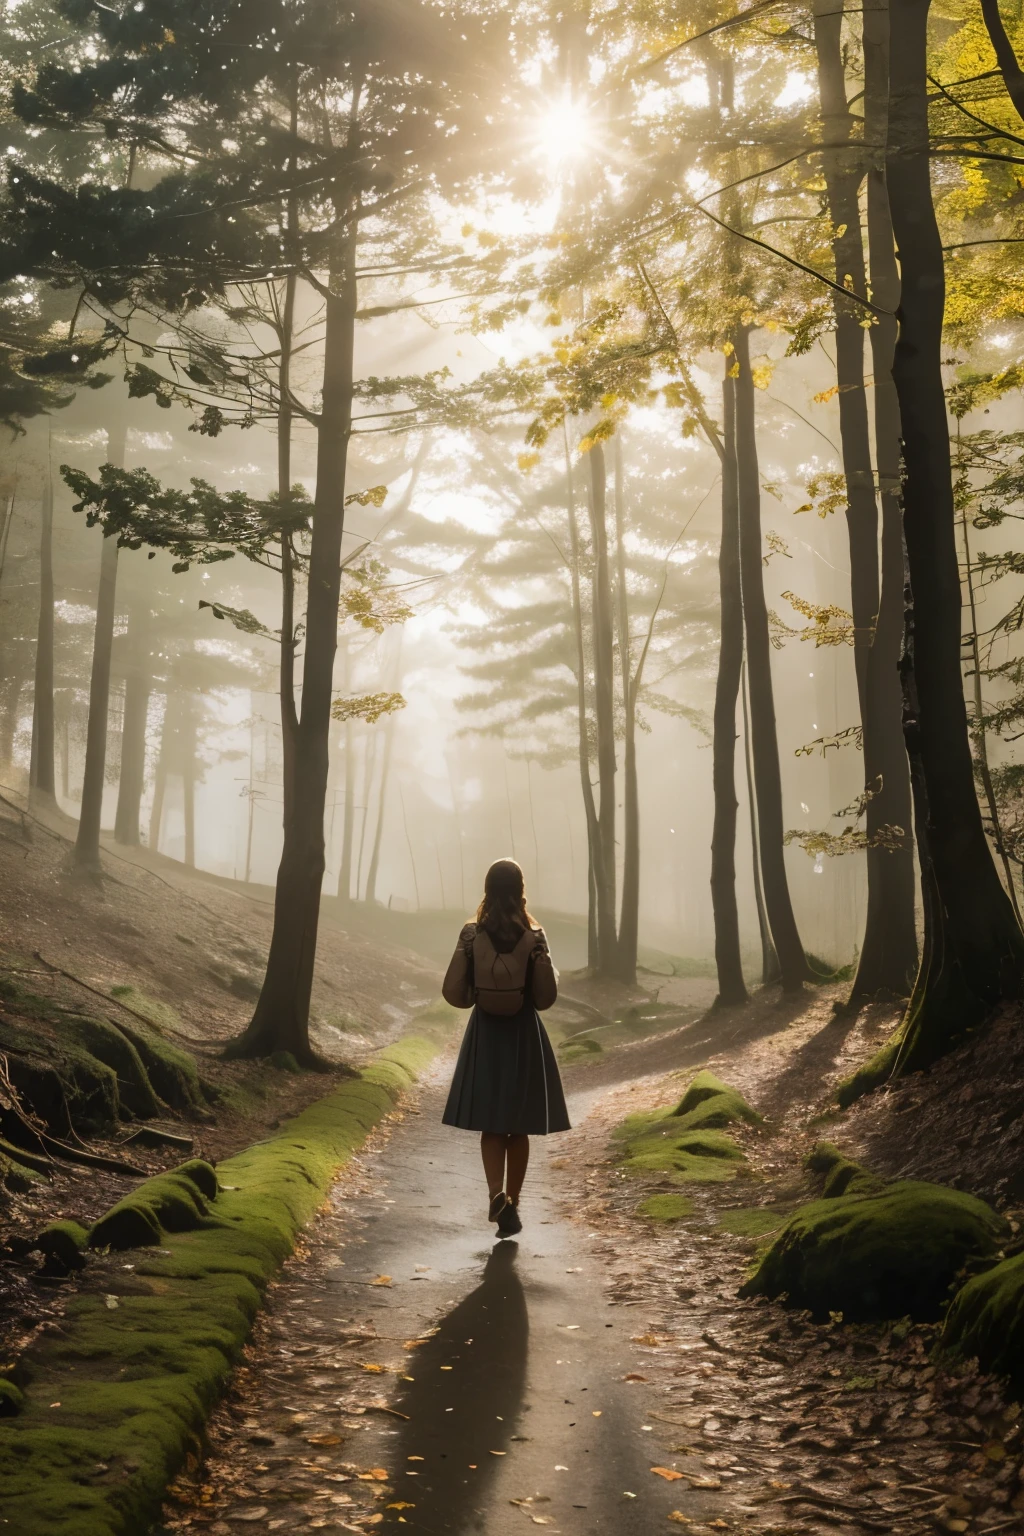 A girl walking in a path through the woods, fog, autumnal landscape, sunlight filtering through the fog and branches, [oil painting] texture, detailed foliage, fallen leaves on the ground, moss-covered rocks, soft sunlight illuminating the girl's face, long shadows stretching across the path, vibrant colors, realistic rendering, vivid hues, bokeh effect, [highres] image, intricate details on the girl's dress, serene atmosphere, [photorealistic:1.37] aesthetics, peaceful ambiance, misty surroundings, tranquil scene, natural lighting, enchanting and dream-like quality, captivating beauty.